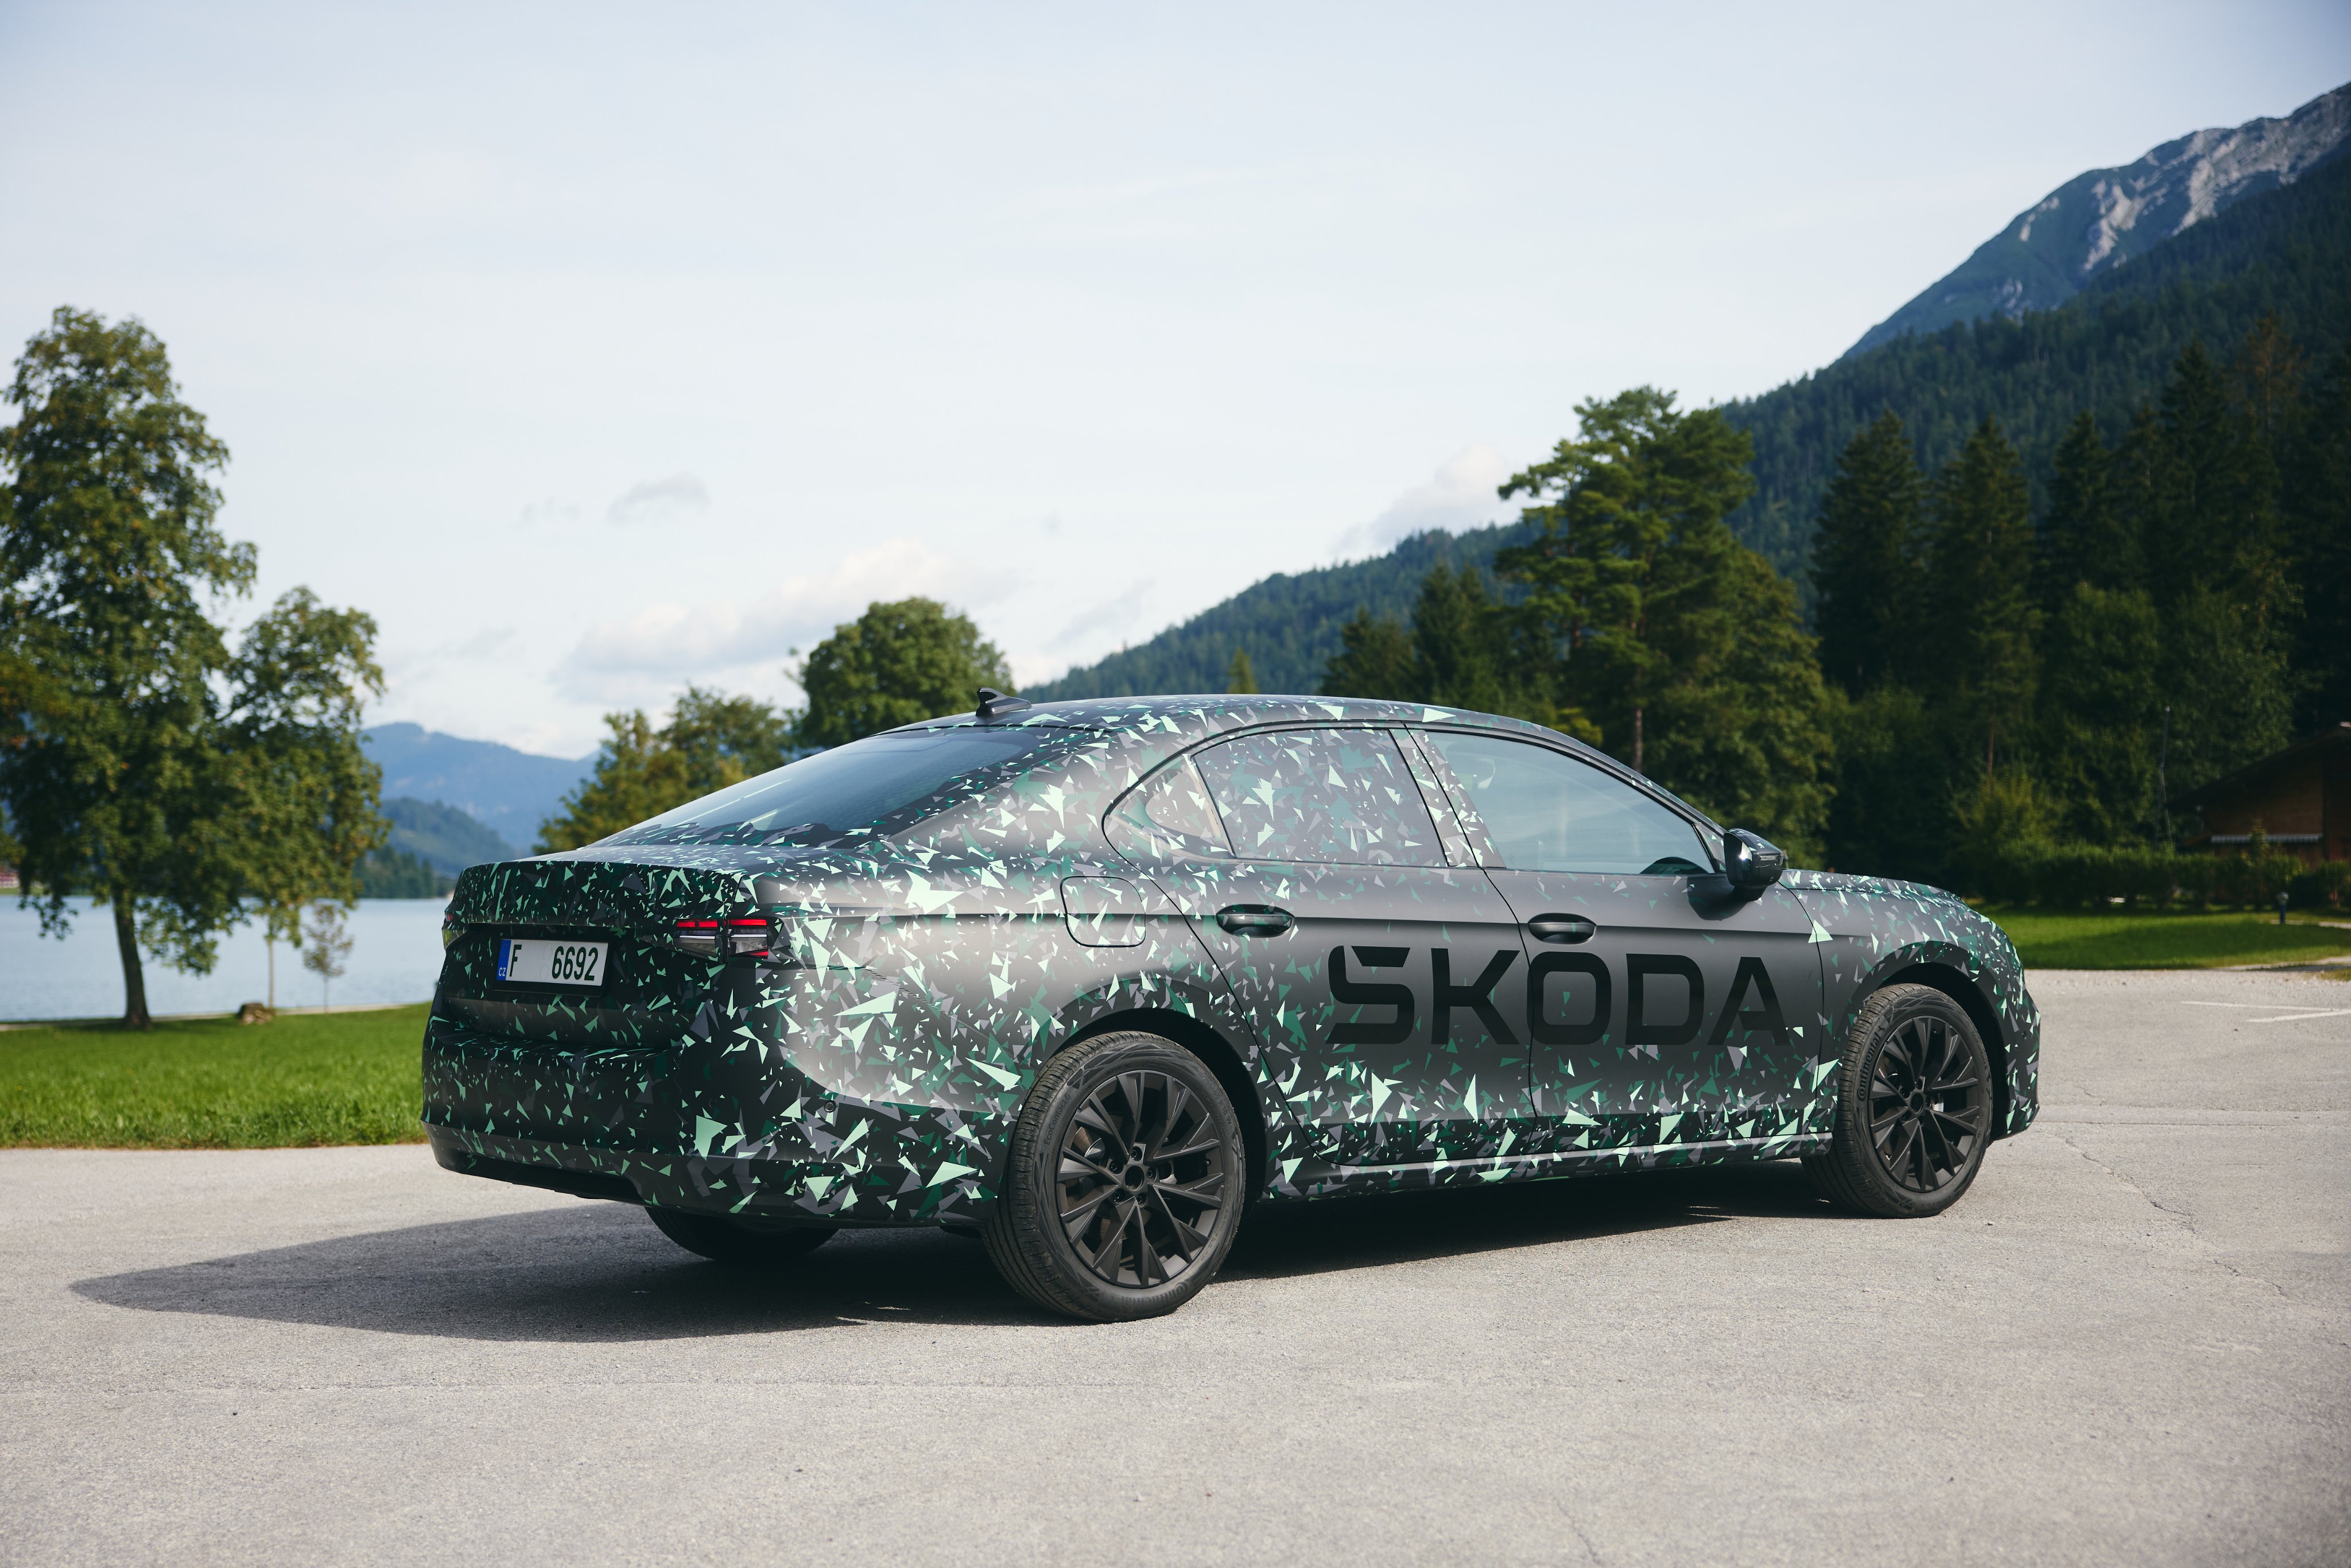 Škoda Auto News on X: #Skoda Auto, about to release the fourth generation  of its ICE flagship model series, the #SkodaSuperb, will once again  complement its popular Combi estate with an elegant